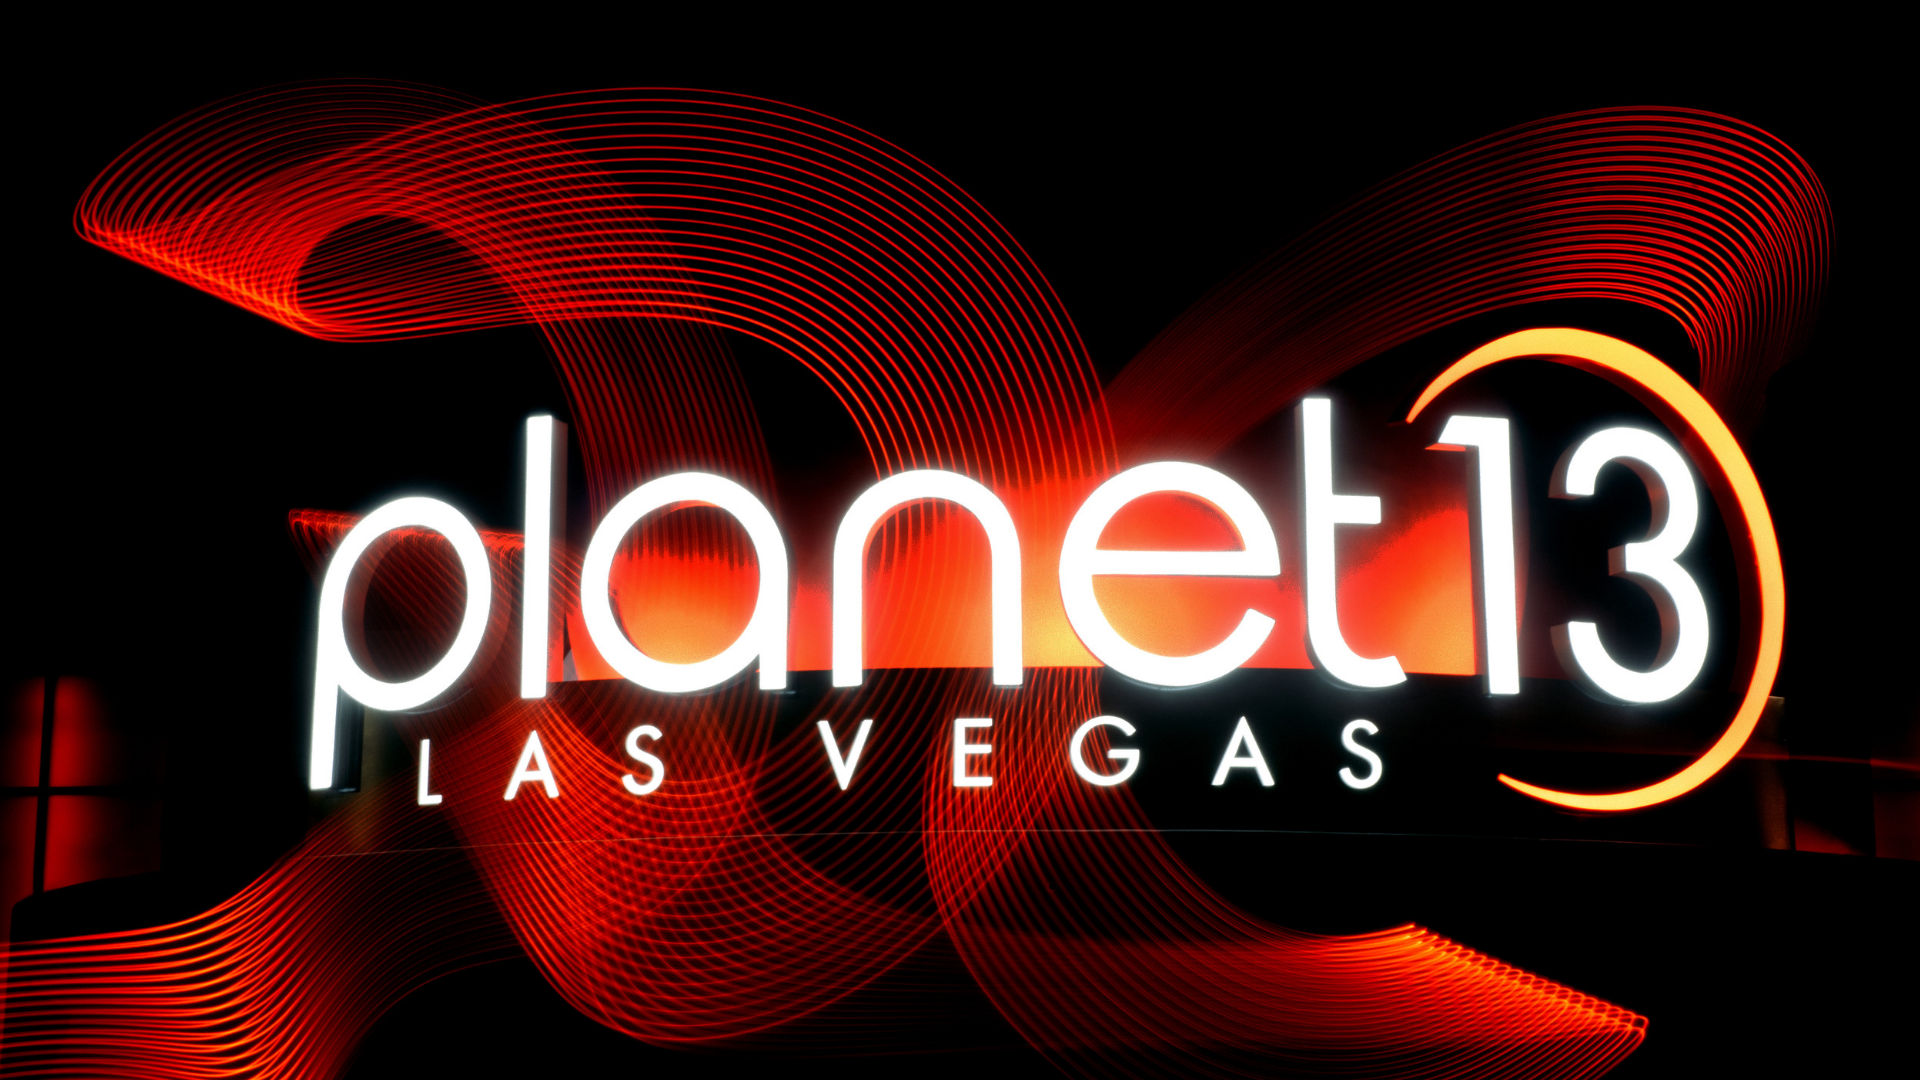 Coming Soon to Planet 13: Phase II